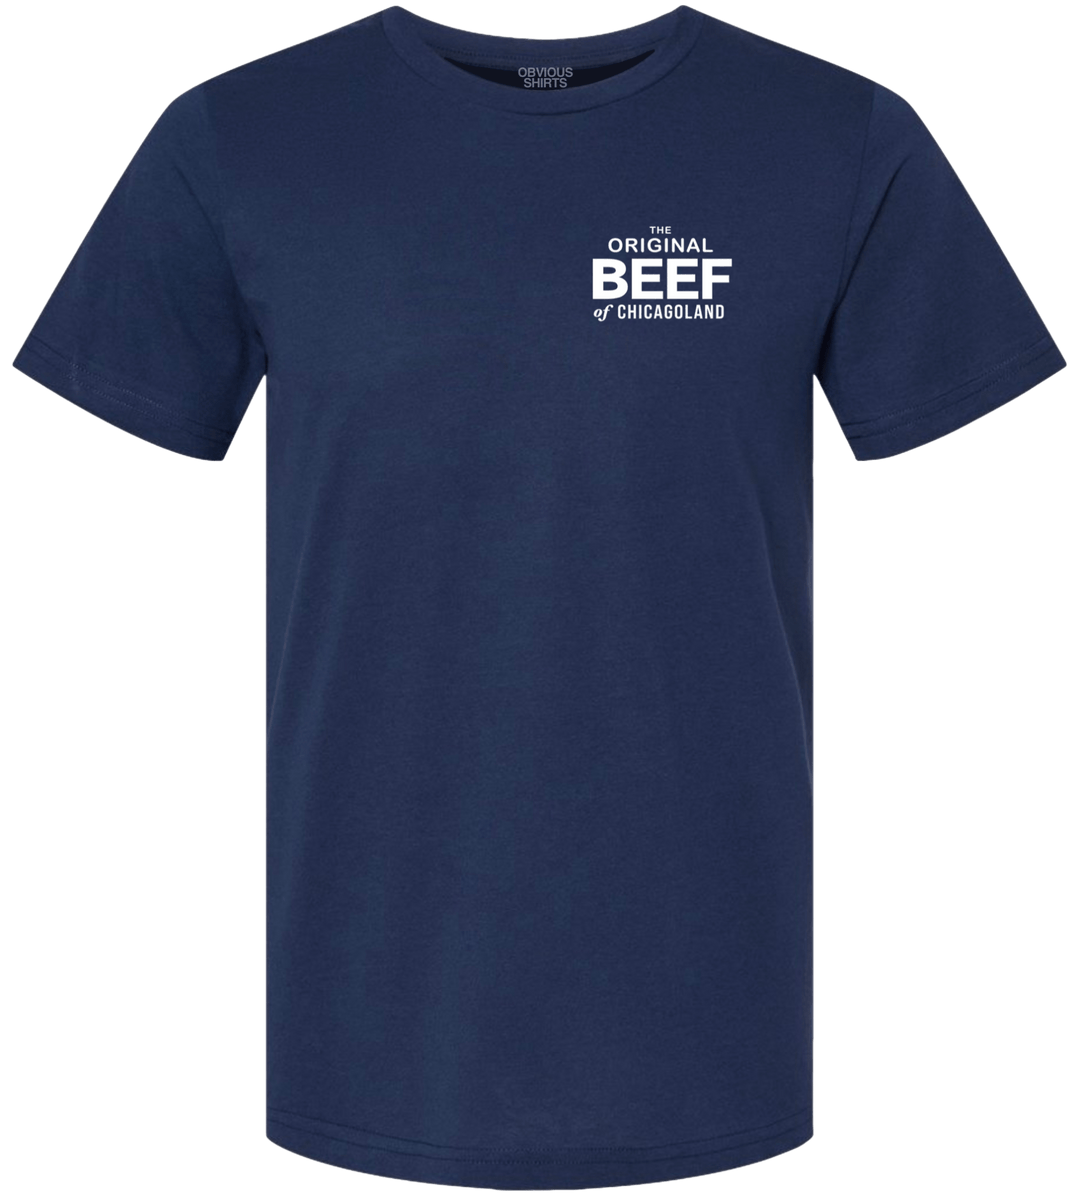 THE ORIGINAL BEEF OF CHICAGOLAND. - OBVIOUS SHIRTS